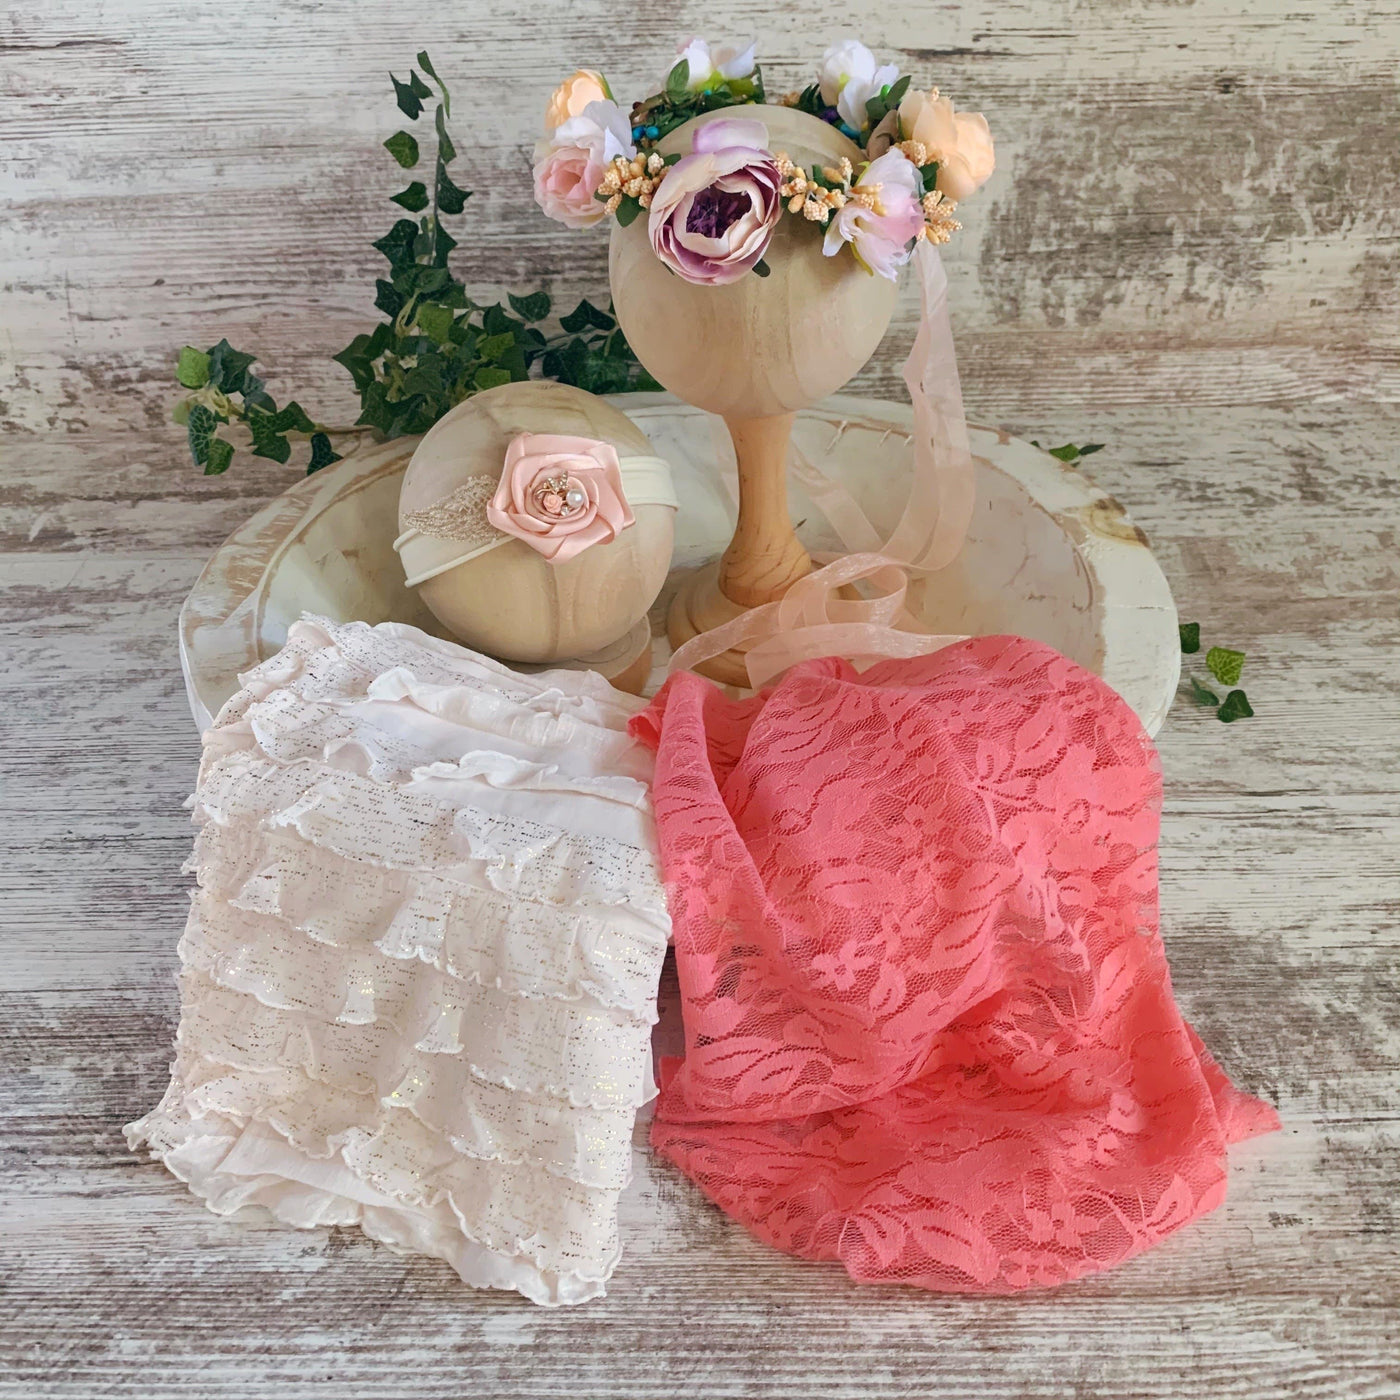 STUDIO SET Blush Gold Ruffle Baby Wrap, Floral Newborn to Toddler Halo Crown, Coral Stretch Lace Newborn Wrap, Blush Gold Leaf Flower Headband - Beautiful Photo Props